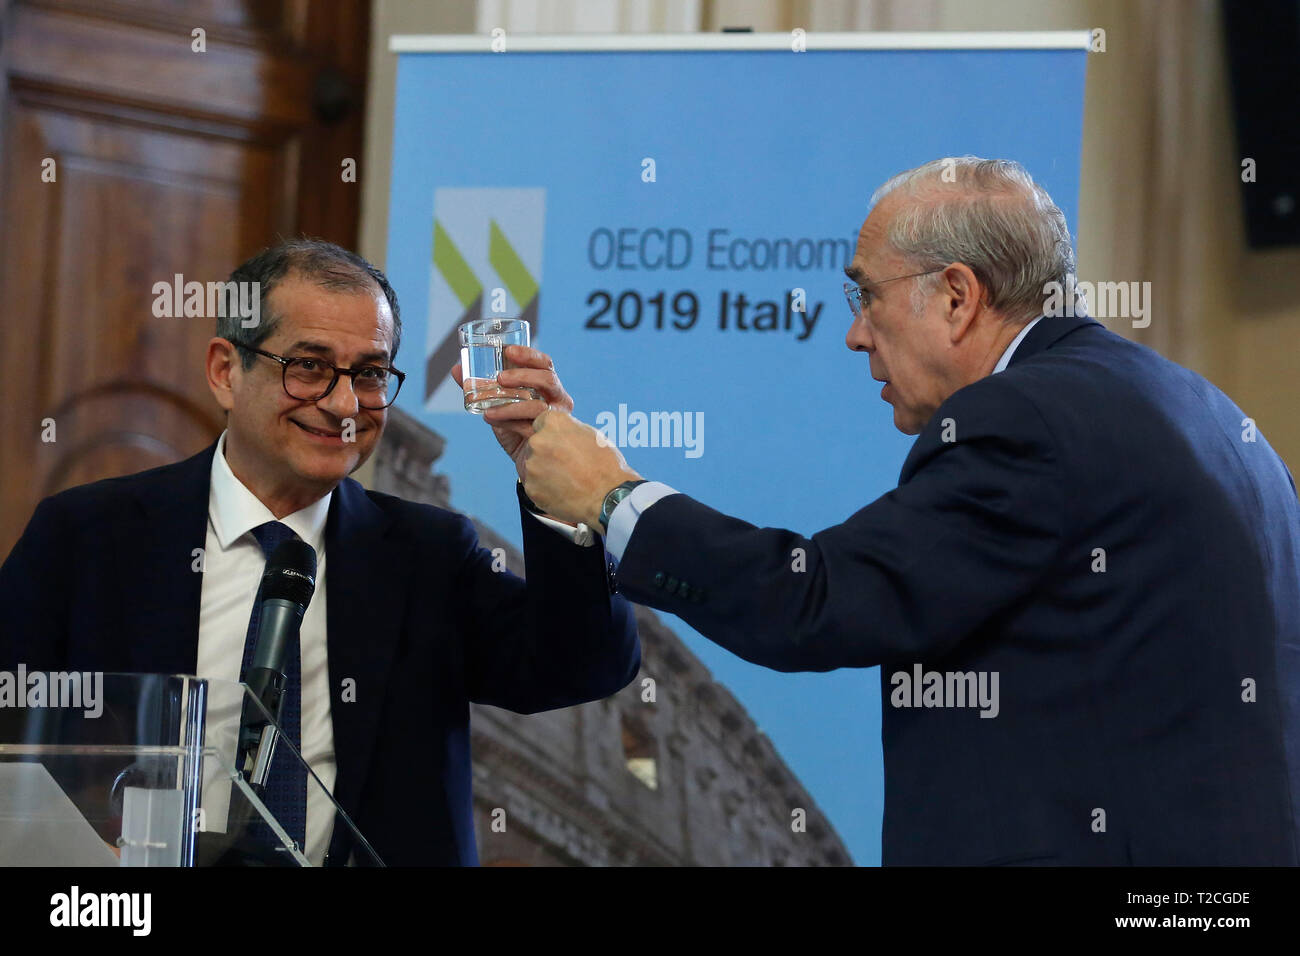 Rome, Italy. 01st Apr, 2019. Secretary General of OECD Angel Gurria handing a glass of water to the Italian Minister of Economy Giovanni Tria Rome April 1st 2019. Presentation of the OECD Report on Italy 2019. The report says after a modest recovery, the Italian economy is weakening. photo di Samantha Zucchi/Insidefoto Credit: insidefoto srl/Alamy Live News Stock Photo